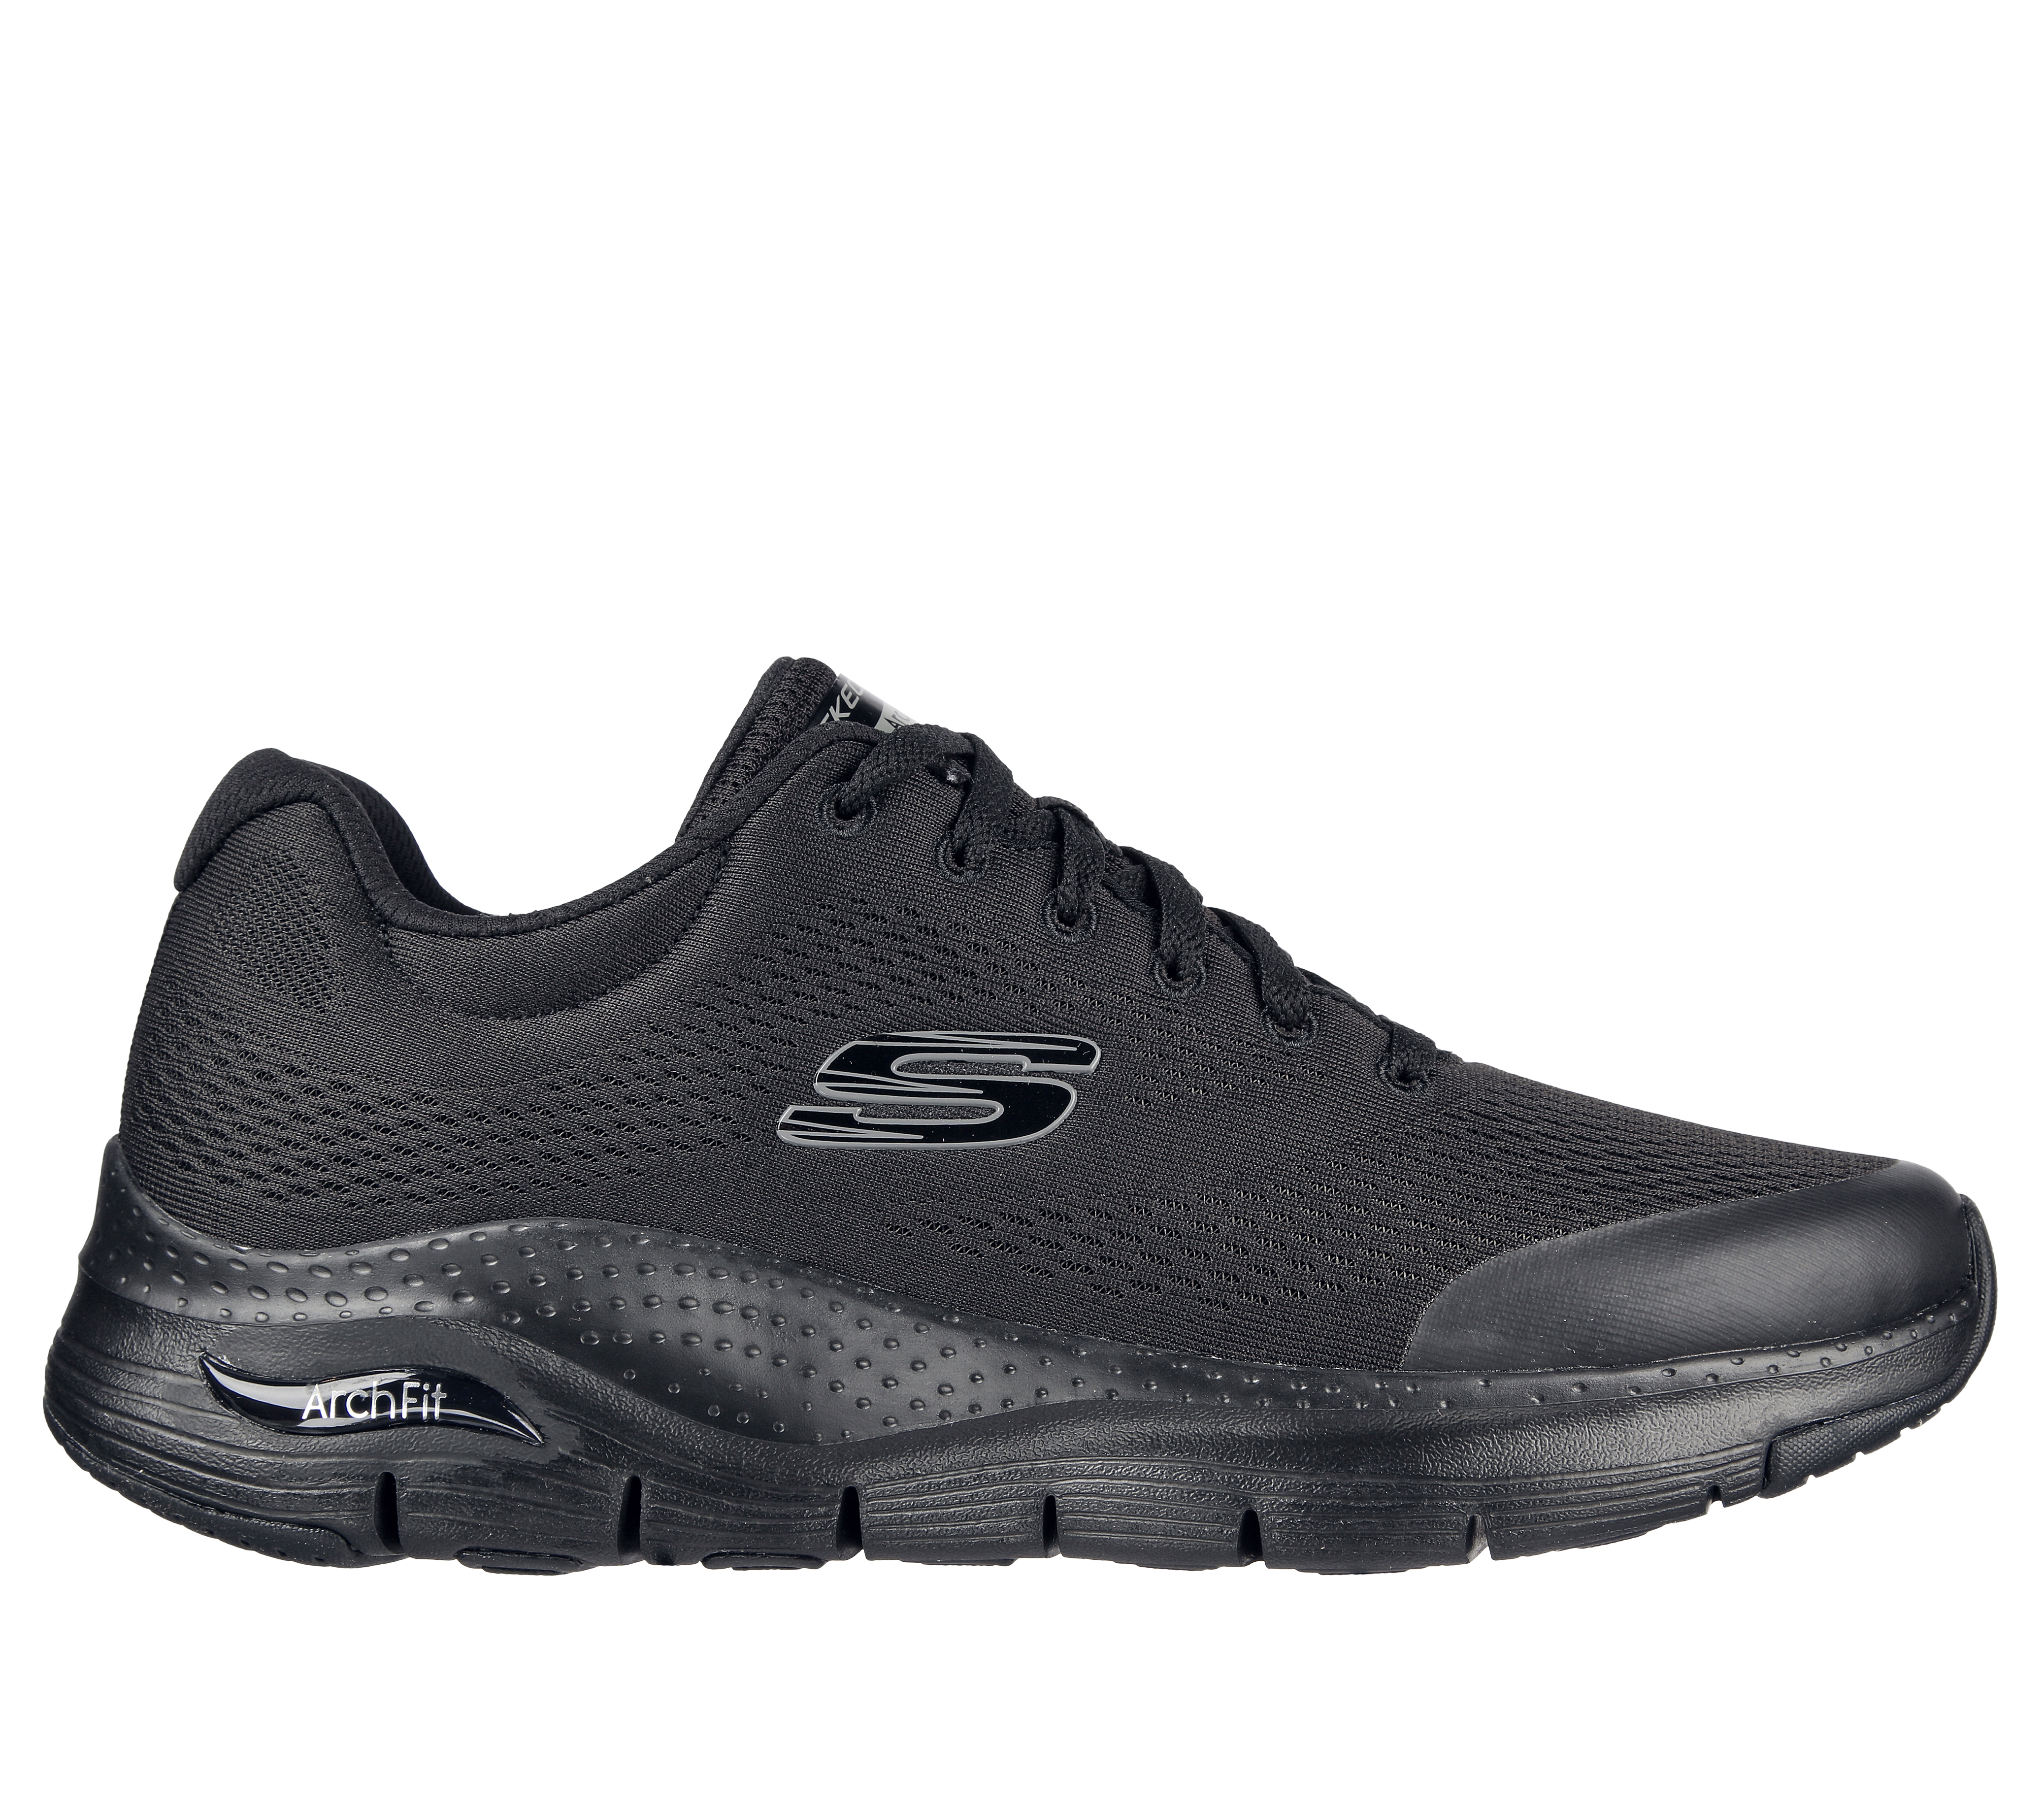 Are Skechers Arch Fit Good for Plantar Fasciitis?